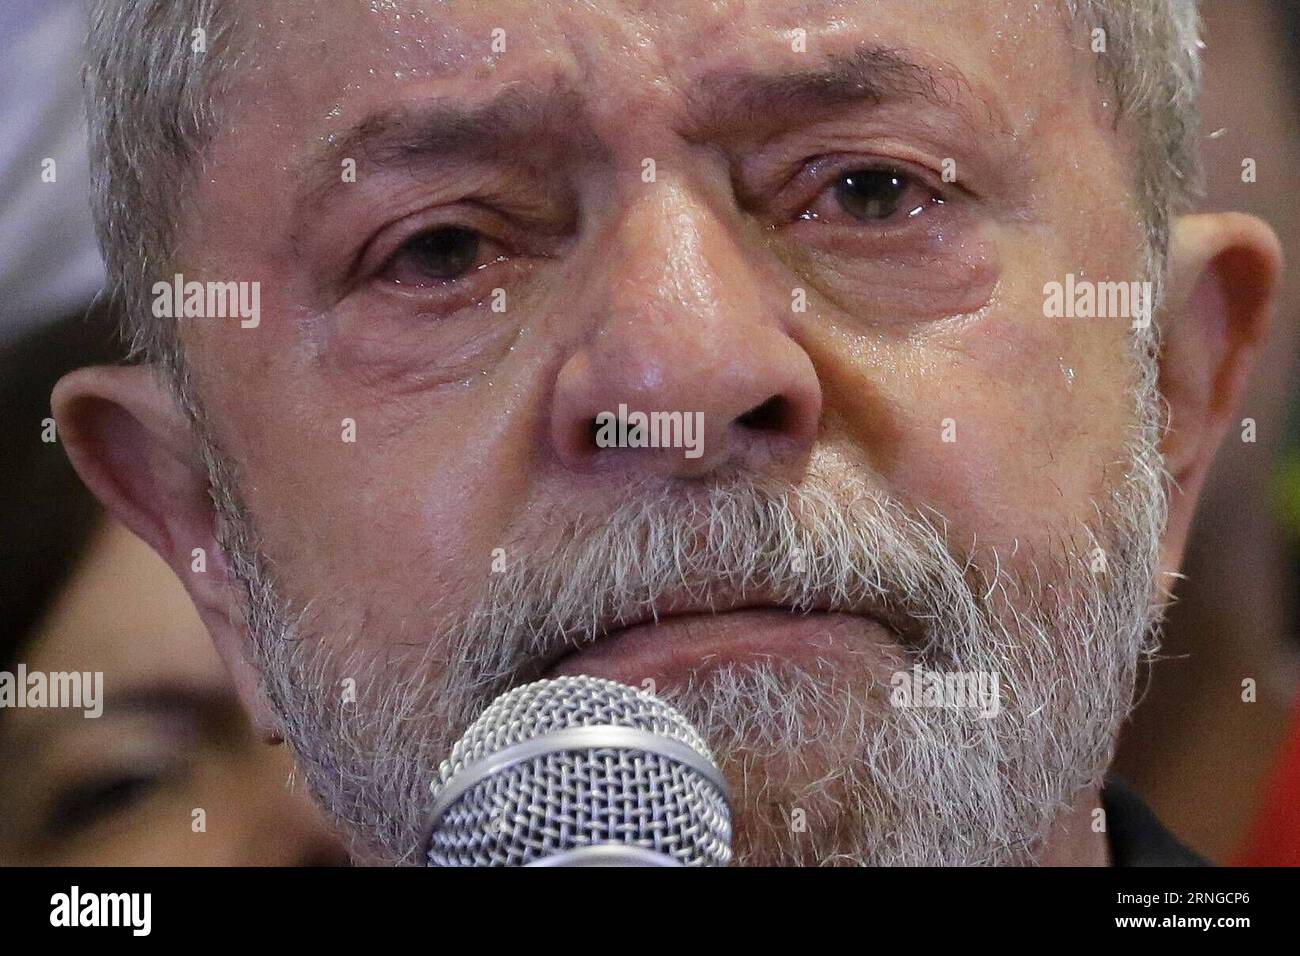 (160921) -- SAO PAULO, Sept. 21, 2016 -- Photo taken on Sept. 15, 2016 shows former Brazilian President Luiz Inacio Lula da Silva reacting during a press conference on the denunciation of the federal public attorney against him and his wife Marisa Leticia for cases of corruption, in Sao Paulo, Brazil. According to local press, the Brazilian federal judge Sergio Moro accepted charges filed last week by prosecutors investigating Lula for alleged corruption and money laundering in the case of corruption in the state oil company Petrobras. Nelson Antoine/) (jp) (da) BRAZIL OUT (yy) BRAZIL-SAO PAUL Stock Photo